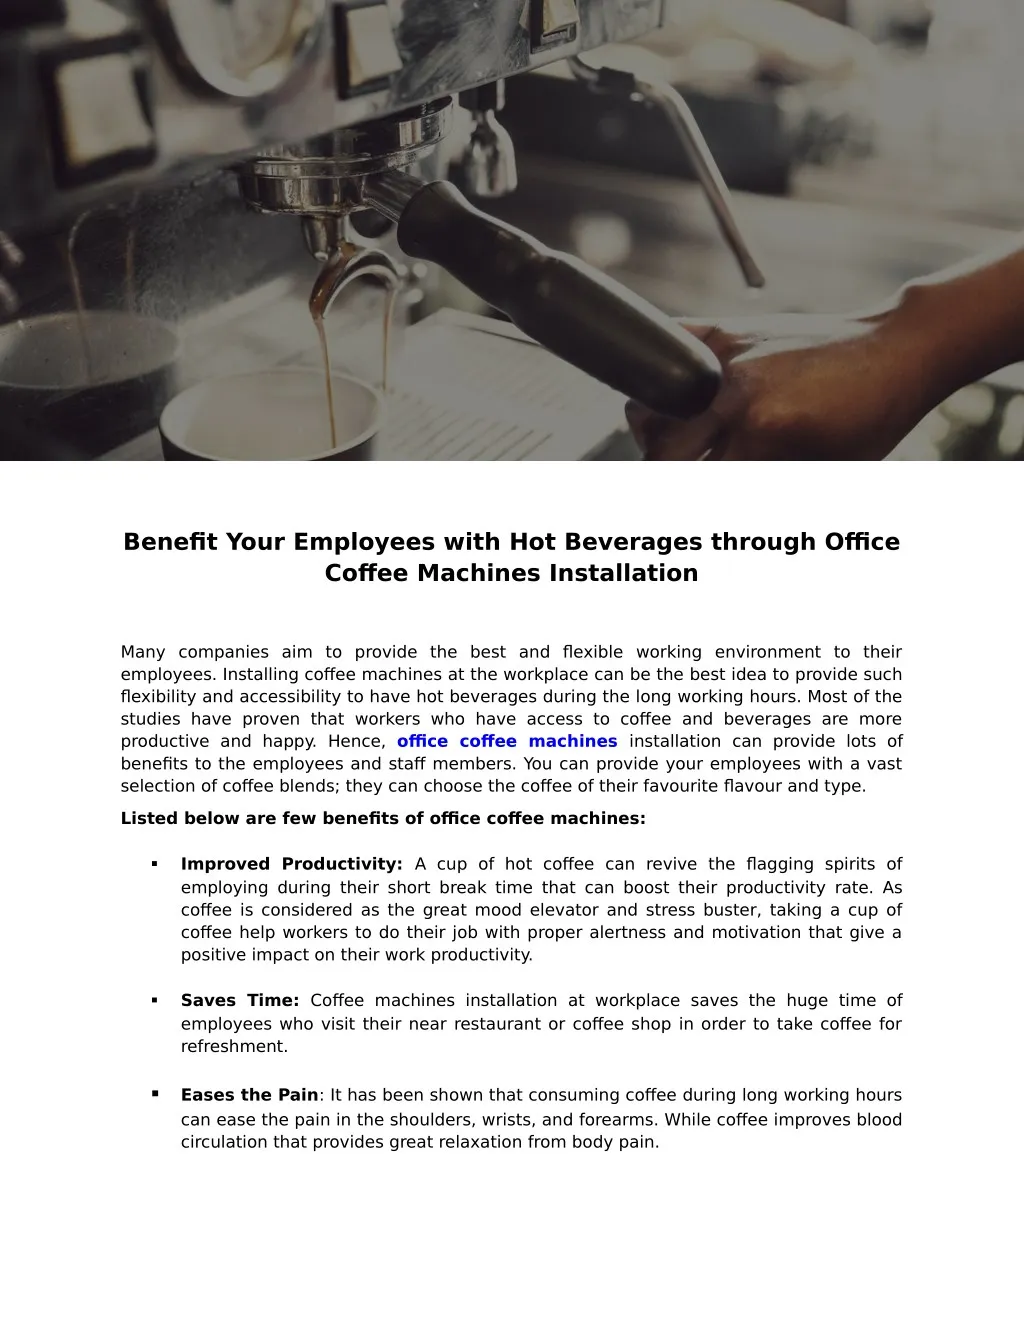 benefit your employees with hot beverages through